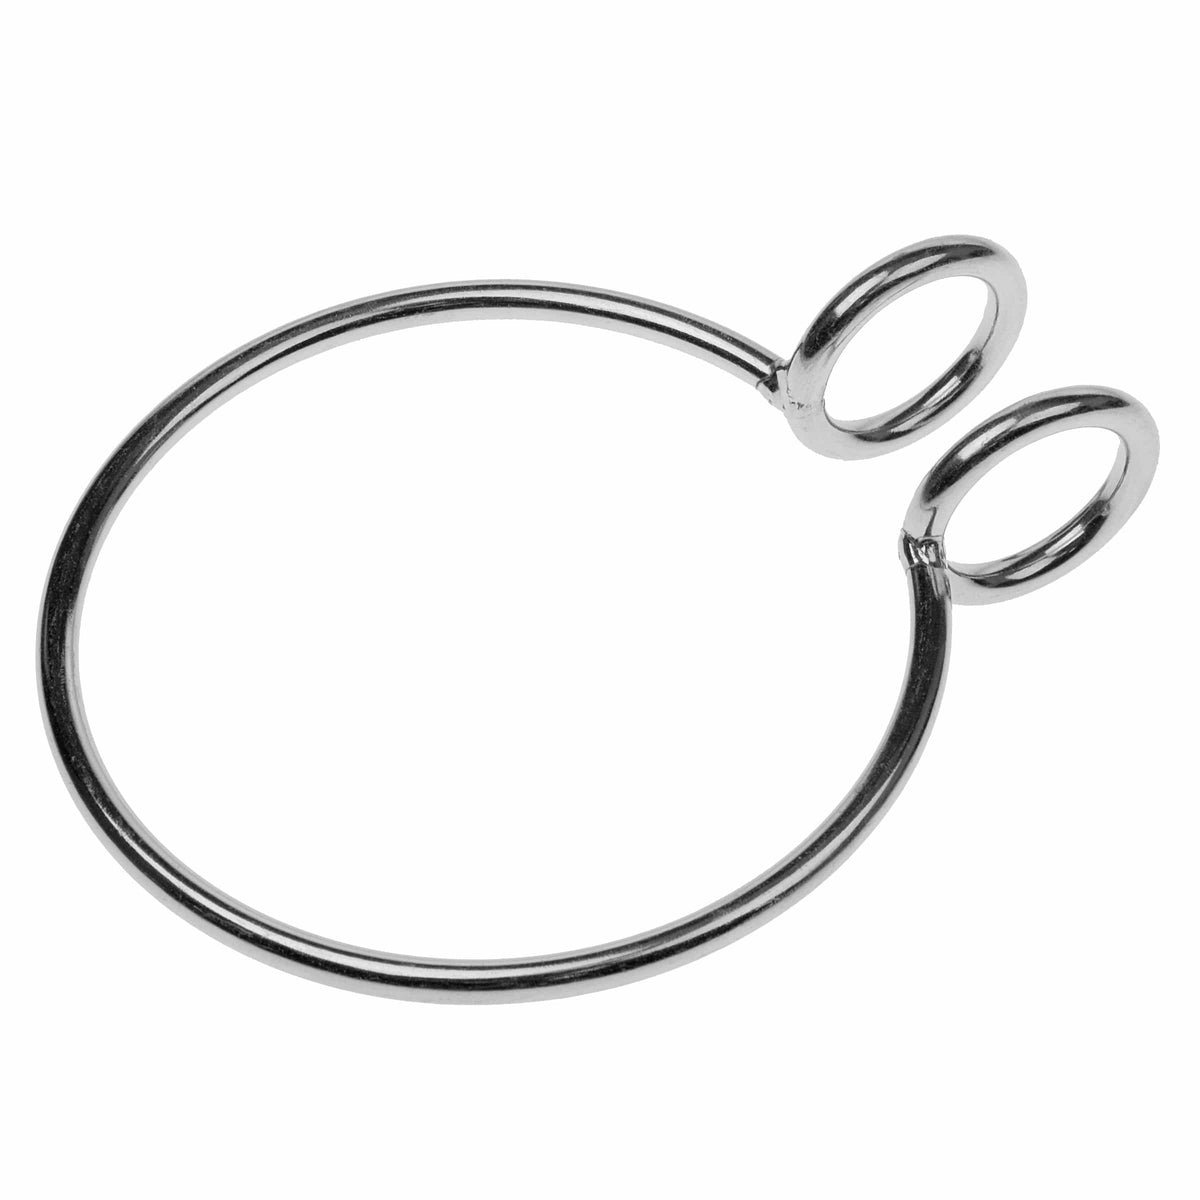 Stainless Steel Anchor Retrieval Ring - T-H Marine Supplies